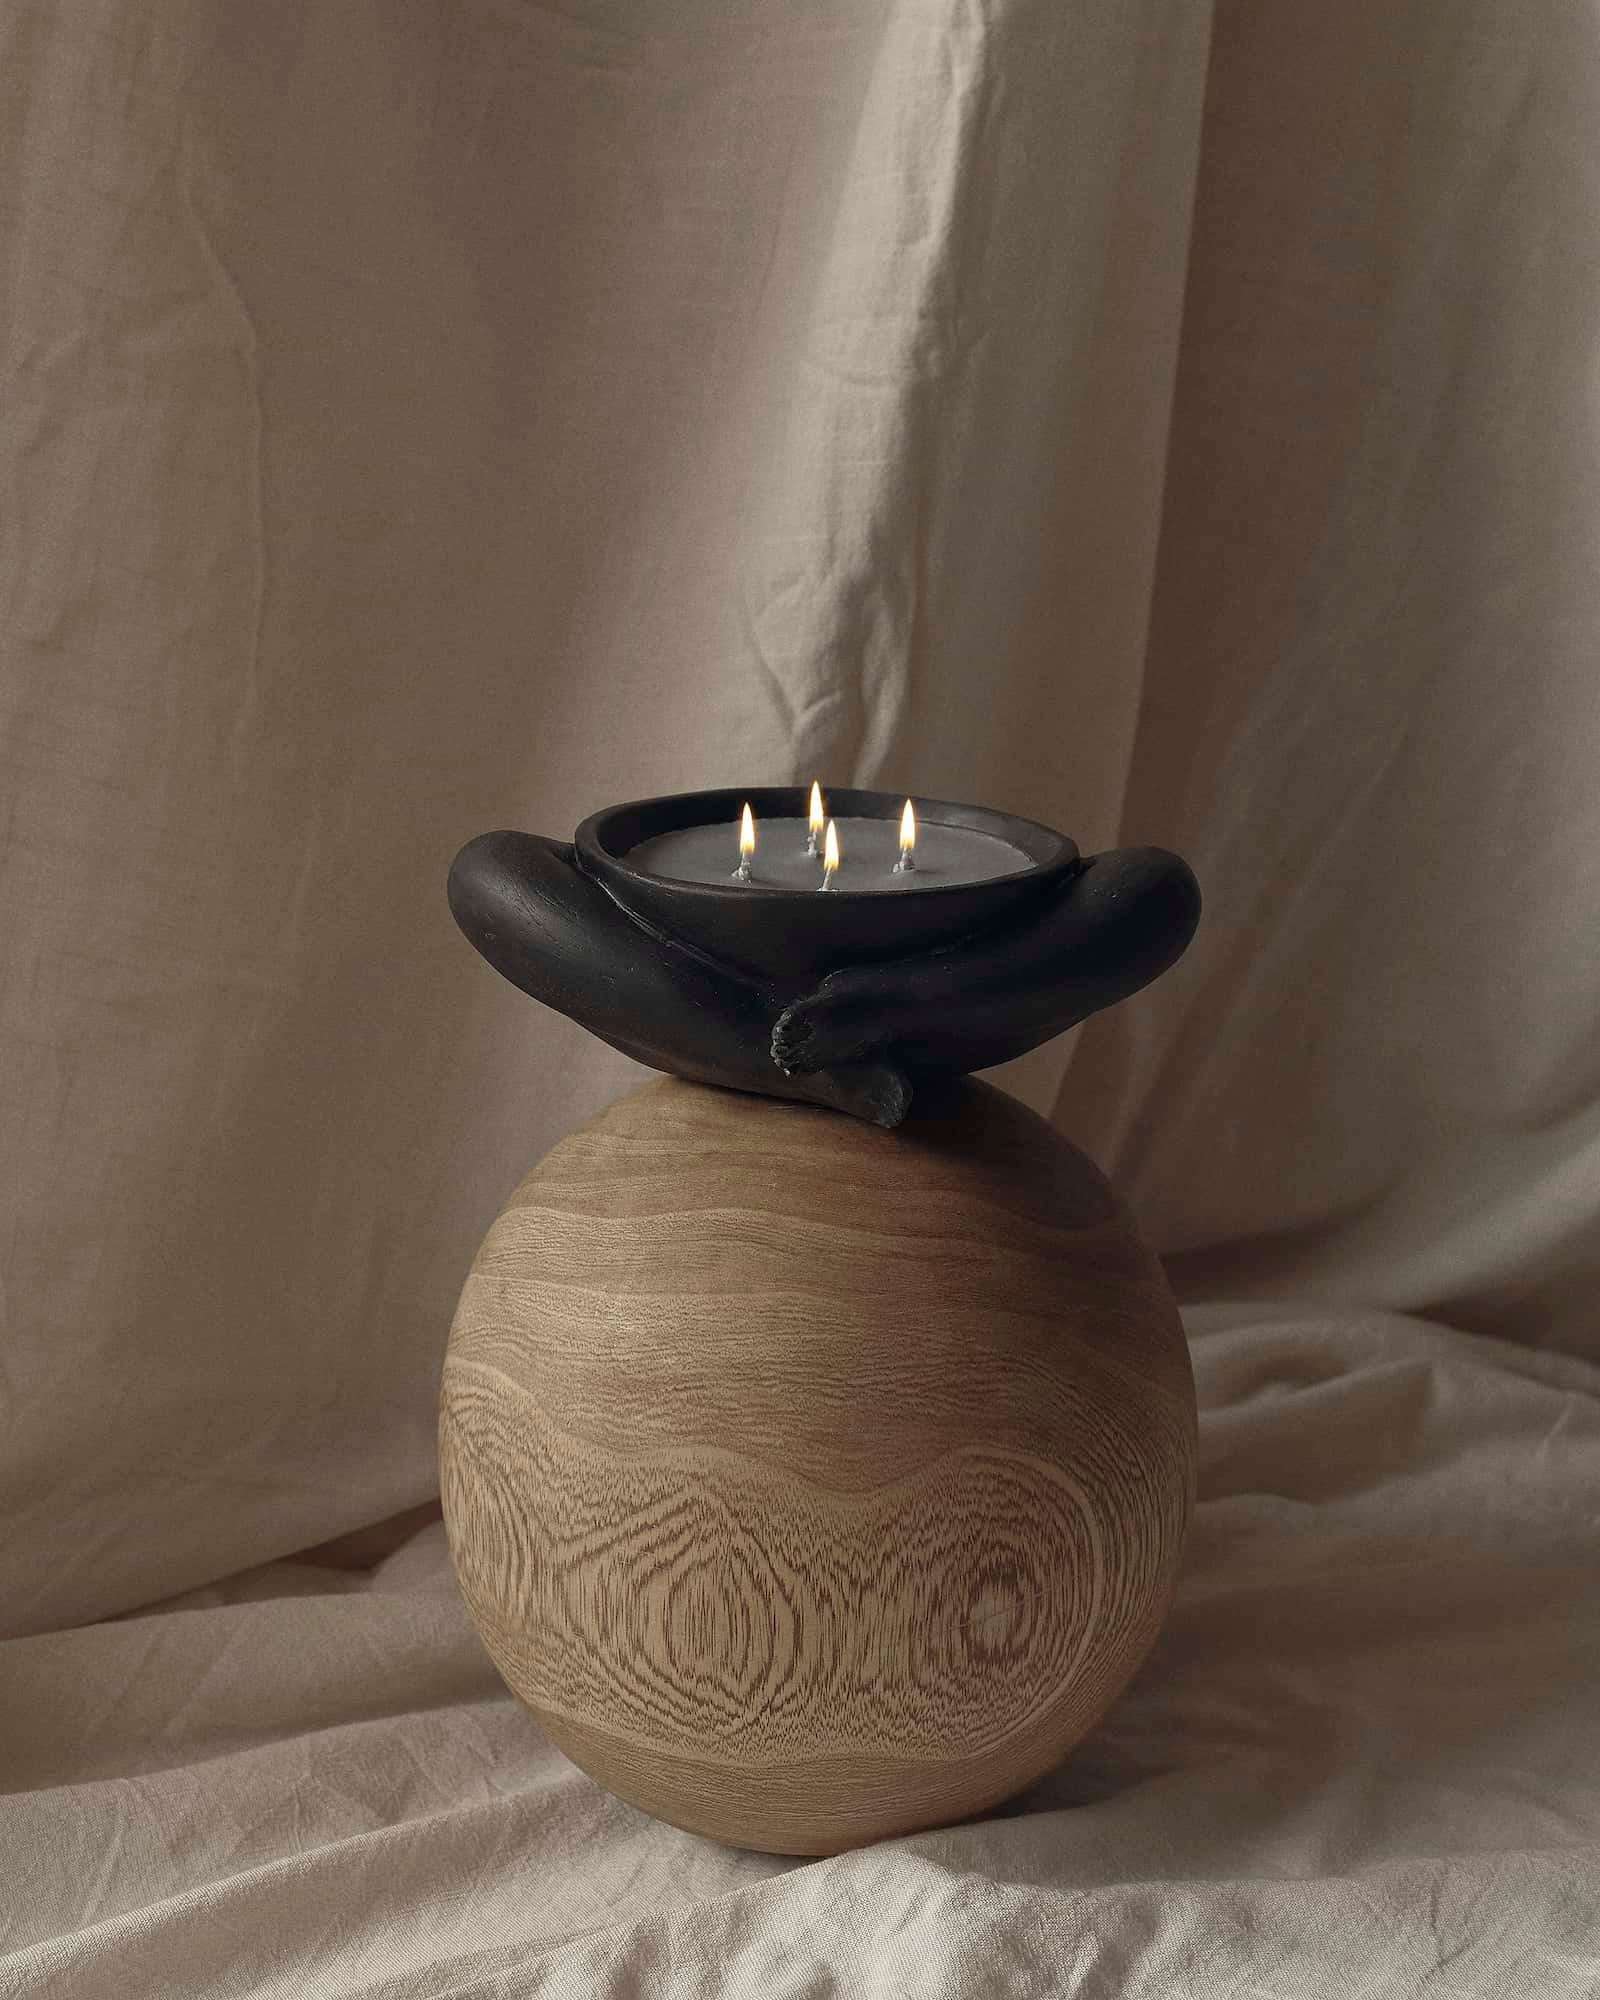 Biblichor sculpture with candle by Marcela Cure
Dimensions: W 19 x D 14 x H 6 cm
Materials: Resin and Stone Composite
Also Available: Sandalwood and Tobacco colours available.
Notes: star anise, cedar leaf, sandalwood, amber, cedarwood and